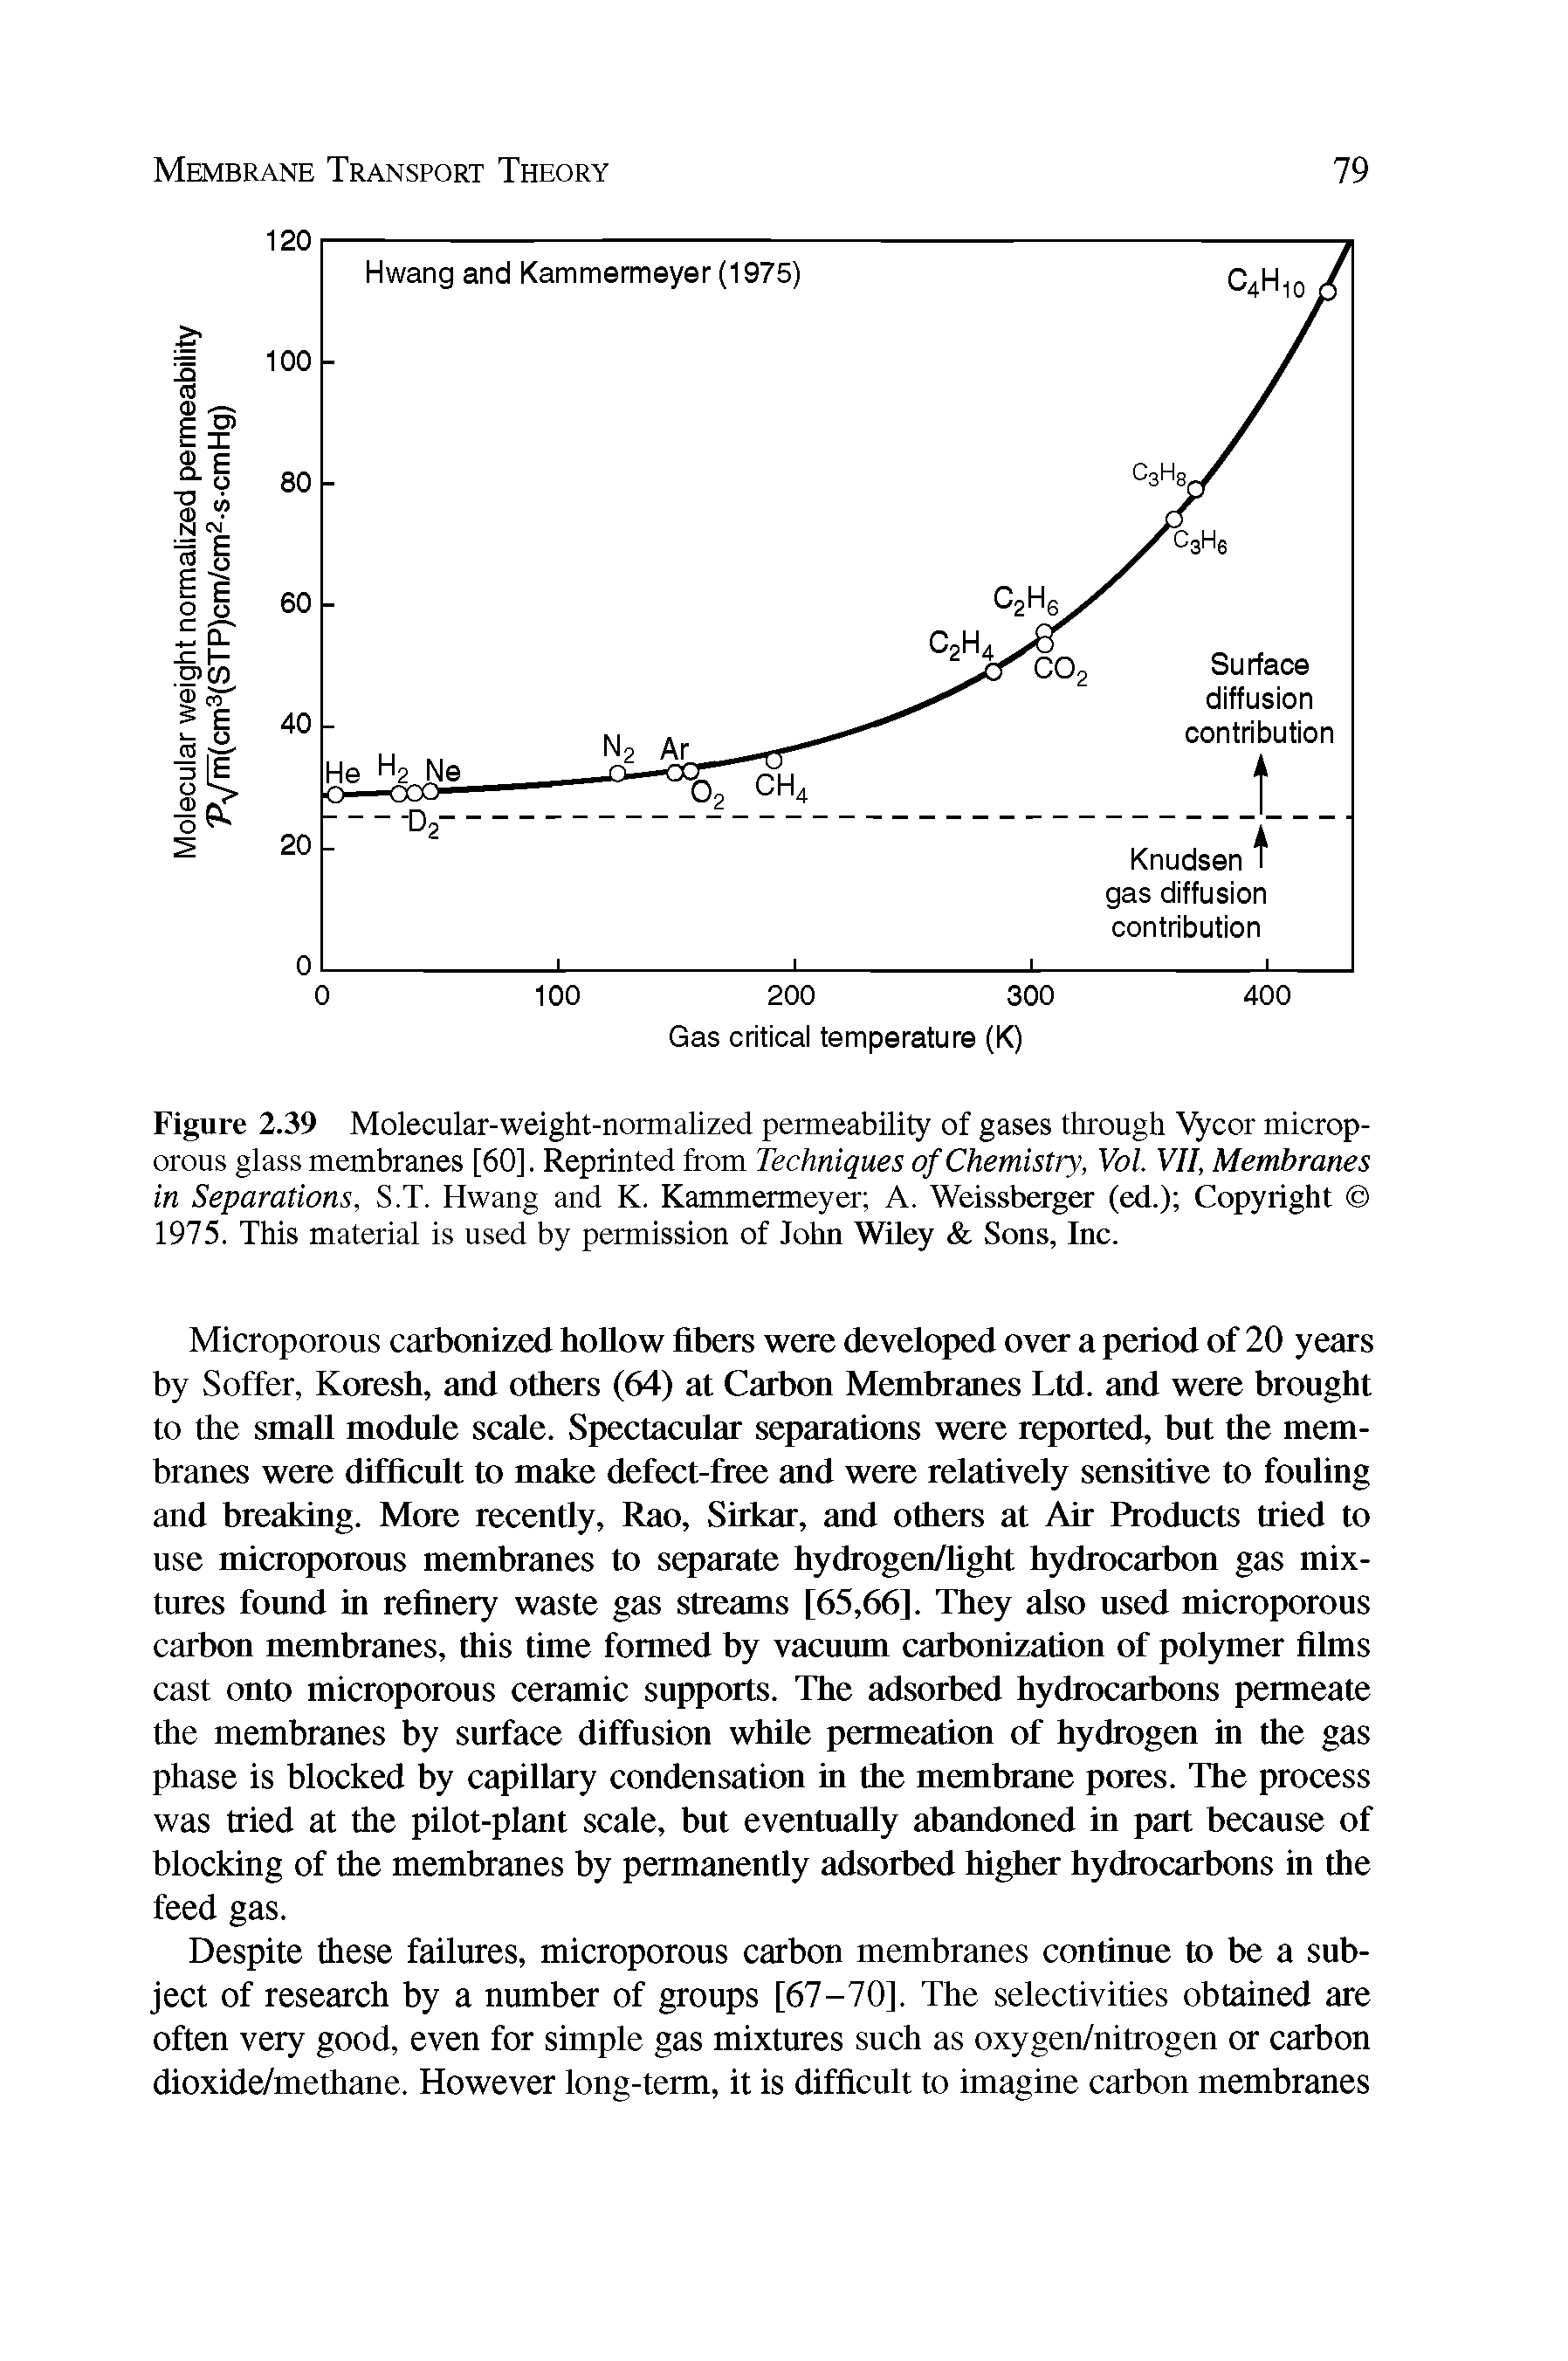 Figure 2.39 Molecular-weight-normalized permeability of gases through Vycor microp-orous glass membranes [60], Reprinted from Techniques of Chemistry, Vol. VII, Membranes in Separations, S.T. Hwang and K. Kammermeyer A. Weissberger (ed.) Copyright 1975. This material is used by permission of John Wiley Sons, Inc.